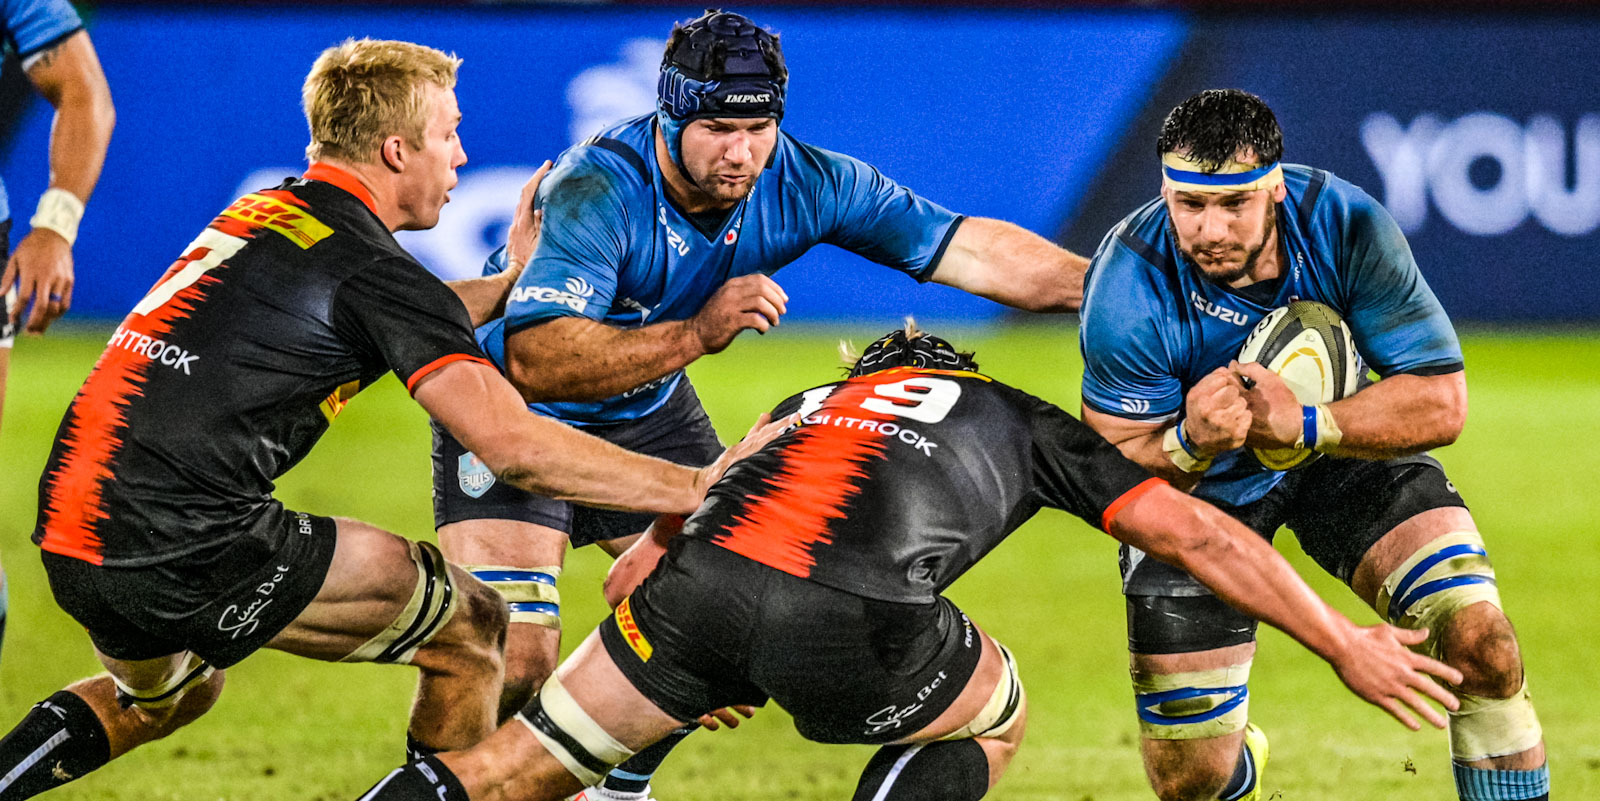 For the Vodacom Bulls' Marcell Coetzee, the URC will provide a return to a number of his old stomping grounds.